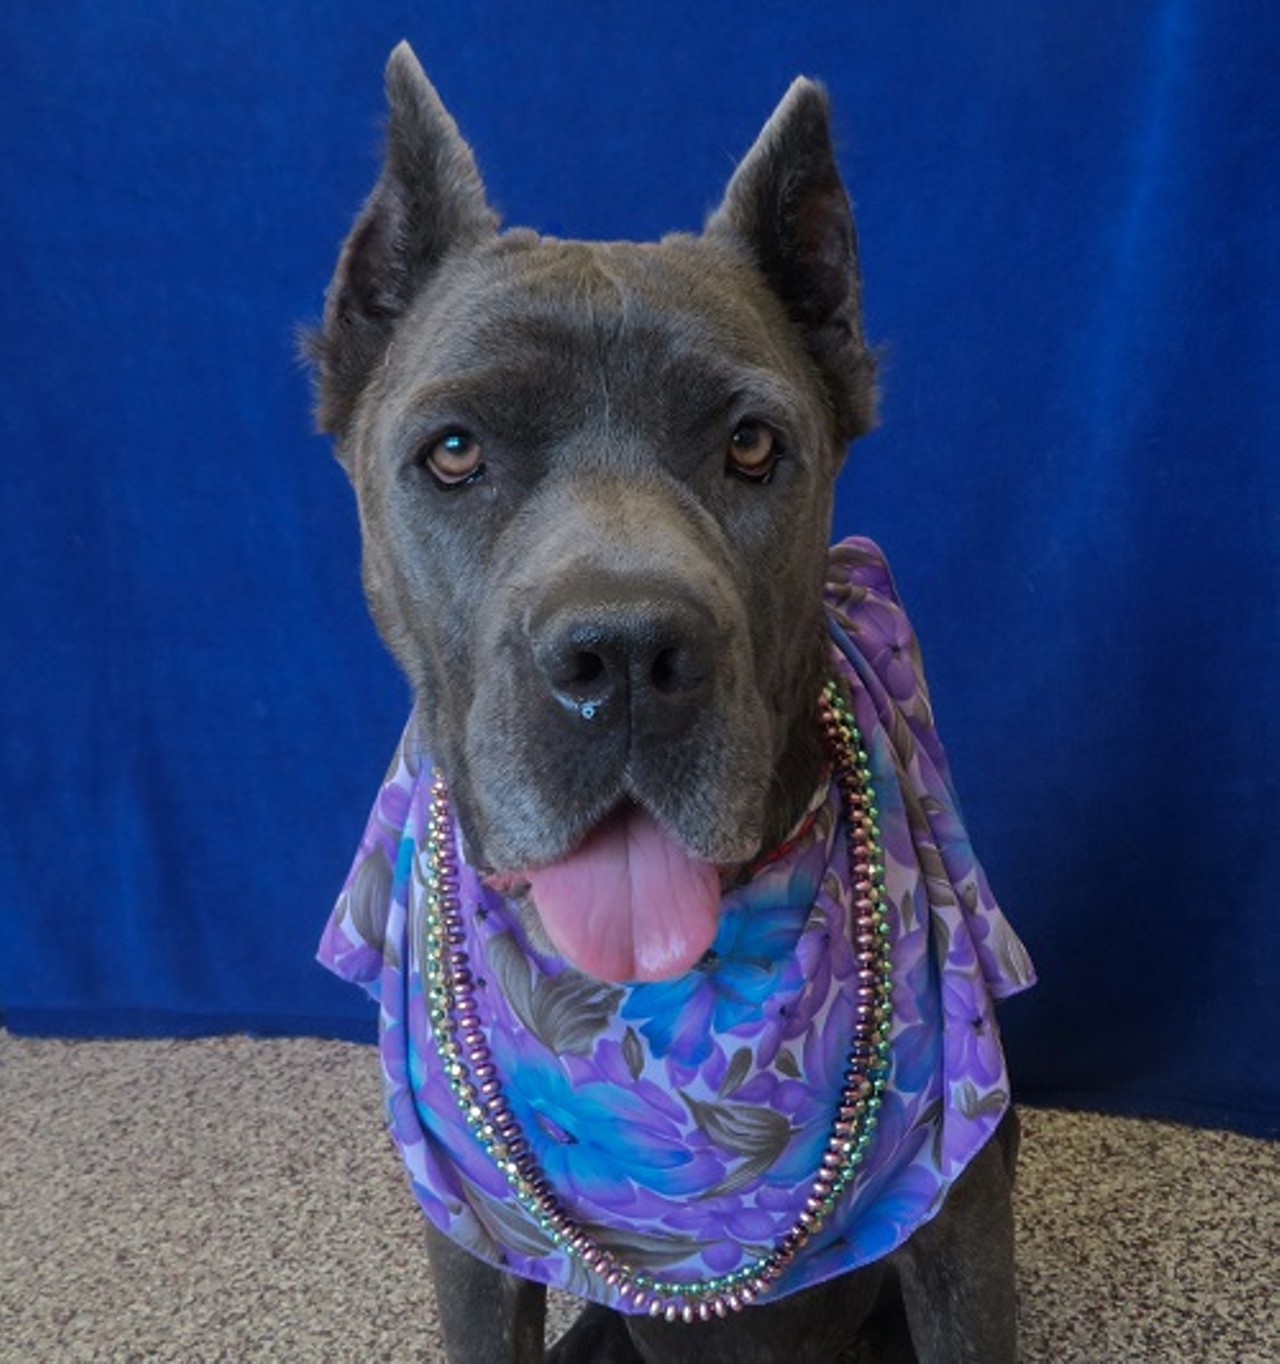 NAME: Shasta
GENDER: Female
BREED: Cane Corso
AGE: 5 years
WEIGHT: 85 pounds
SPECIAL CONSIDERATIONS: Shasta prefers a home with no cats and older or no children.
REASON I CAME TO MHS: Homeless in Detroit
LOCATION: Mackey Center for Animal Care in Detroit
ID NUMBER: 870870